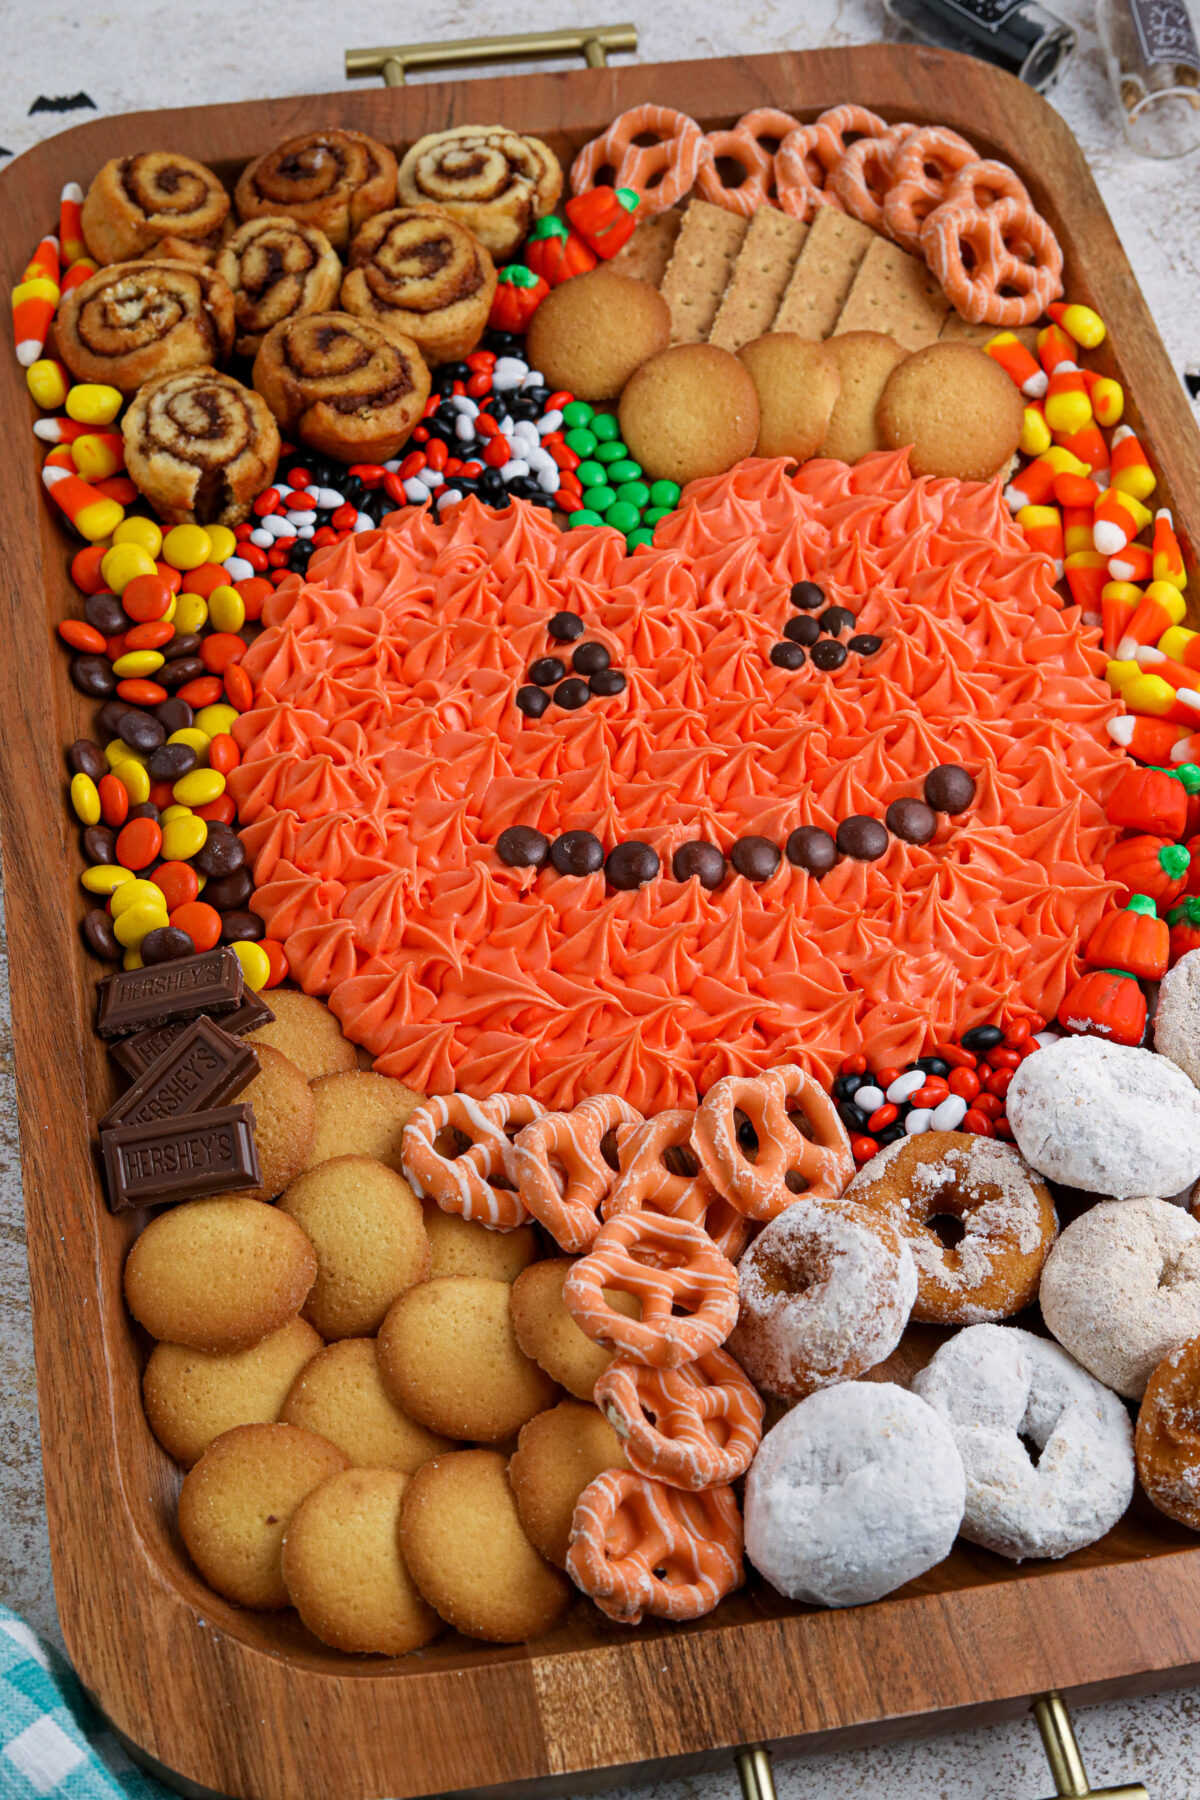 Make your Halloween party one to remember with this easy pumpkin frosting board featuring homemade orange frosting and fun dippers!